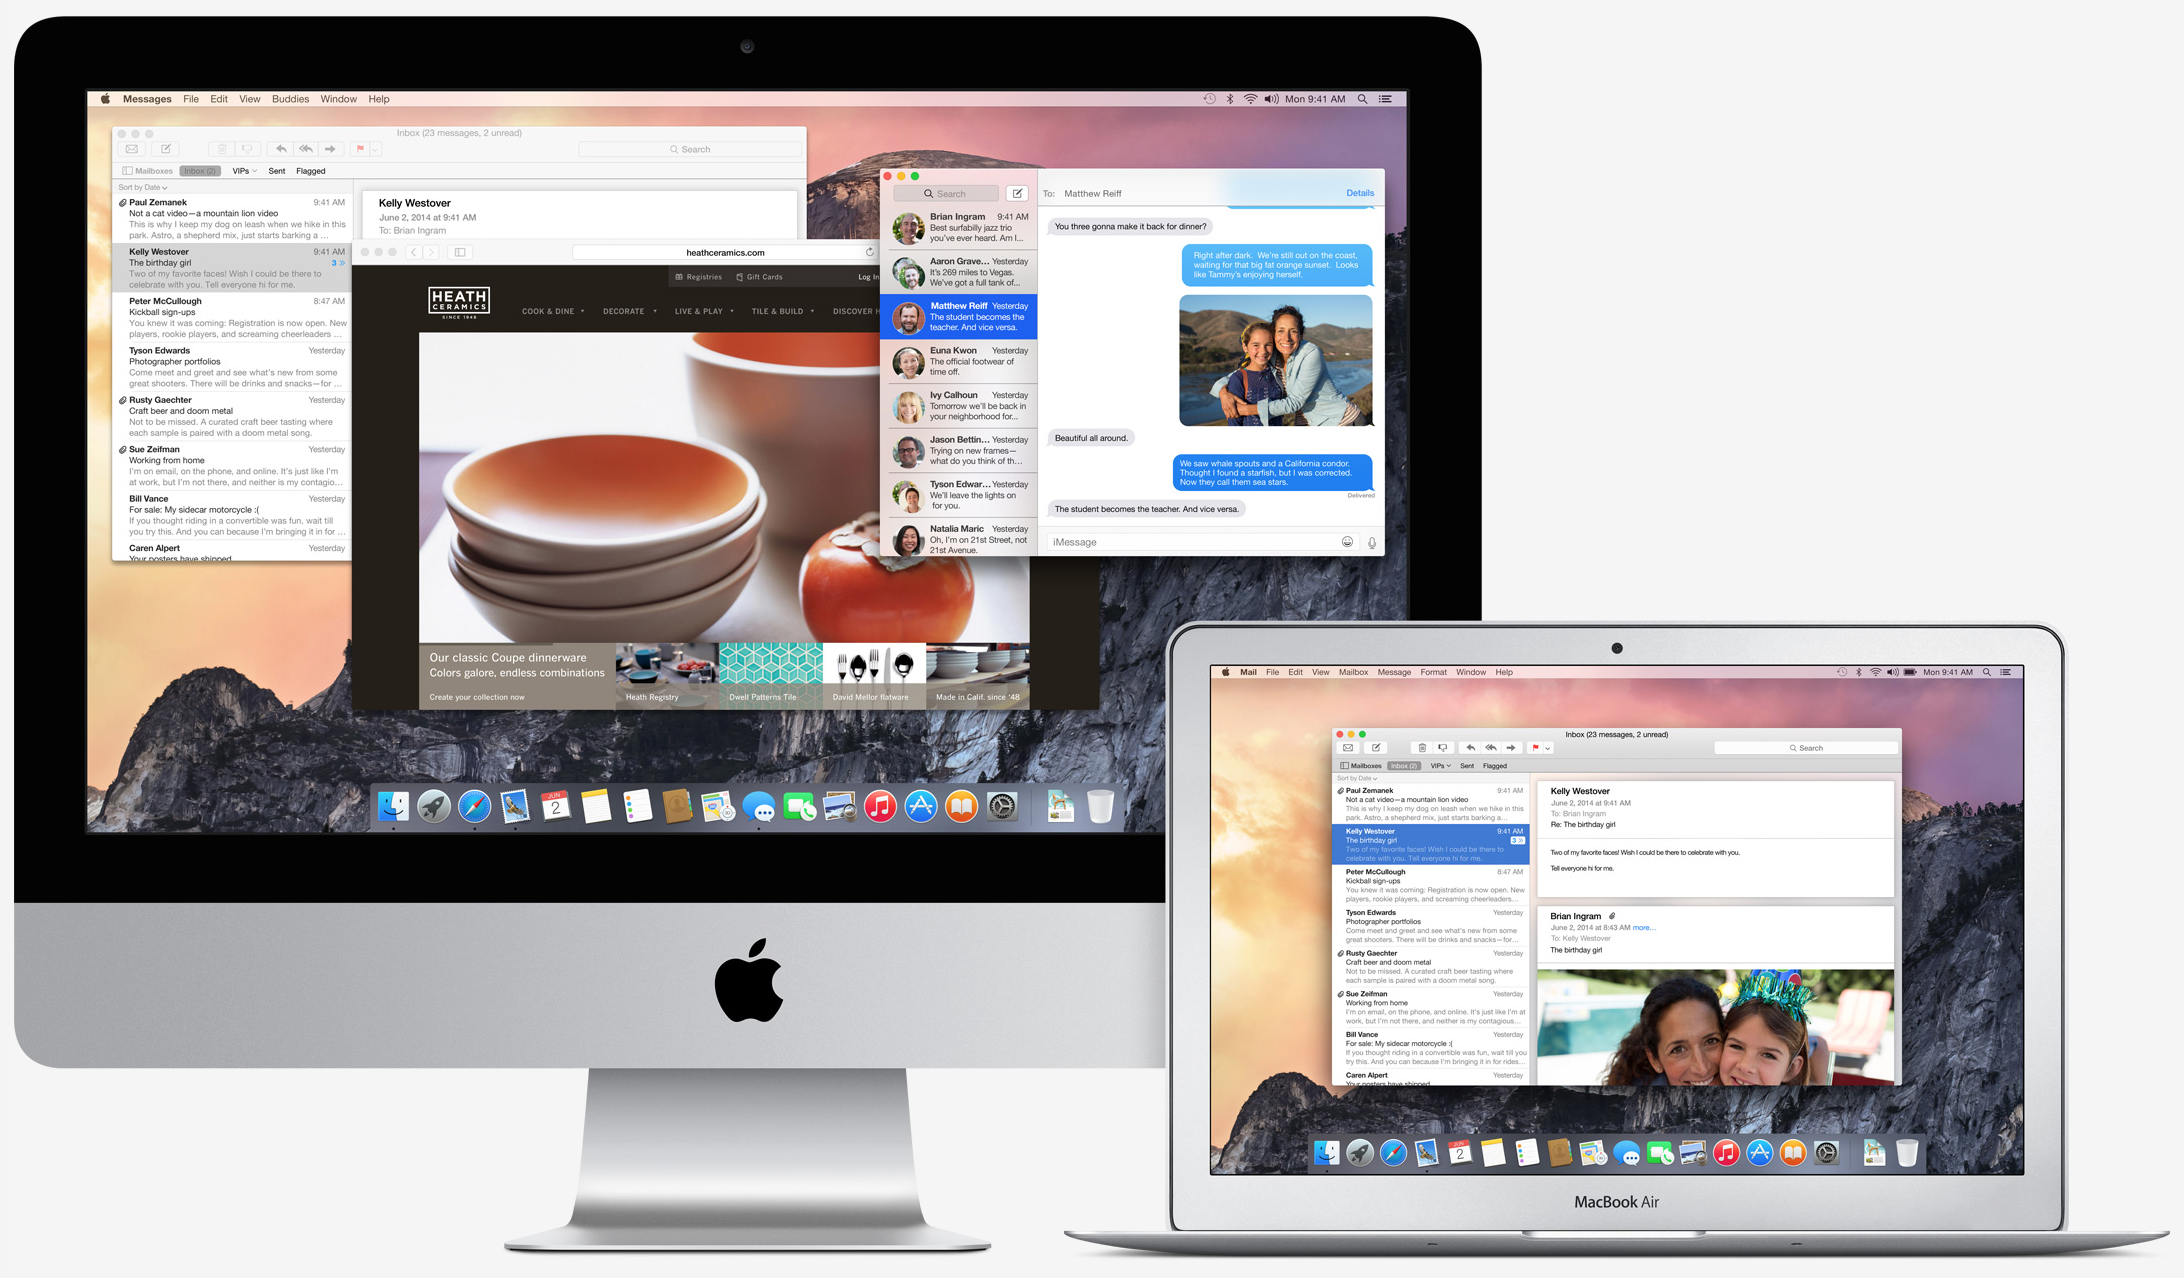 OS X Yosemite planned for late Oct. as Apple preps 4K desktop & 12 